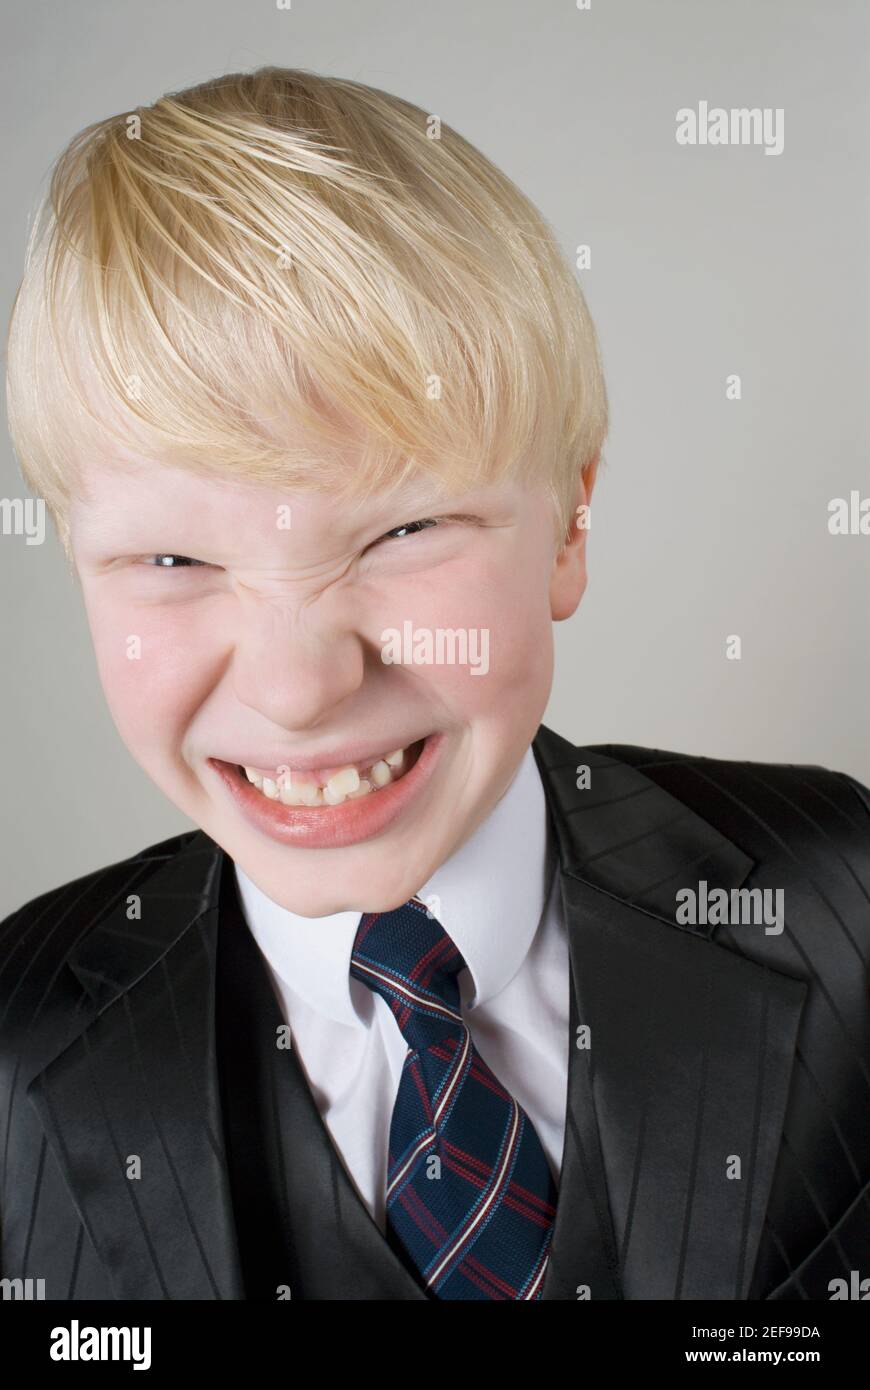 Close up of a boy clenching his teeth Stock Photo